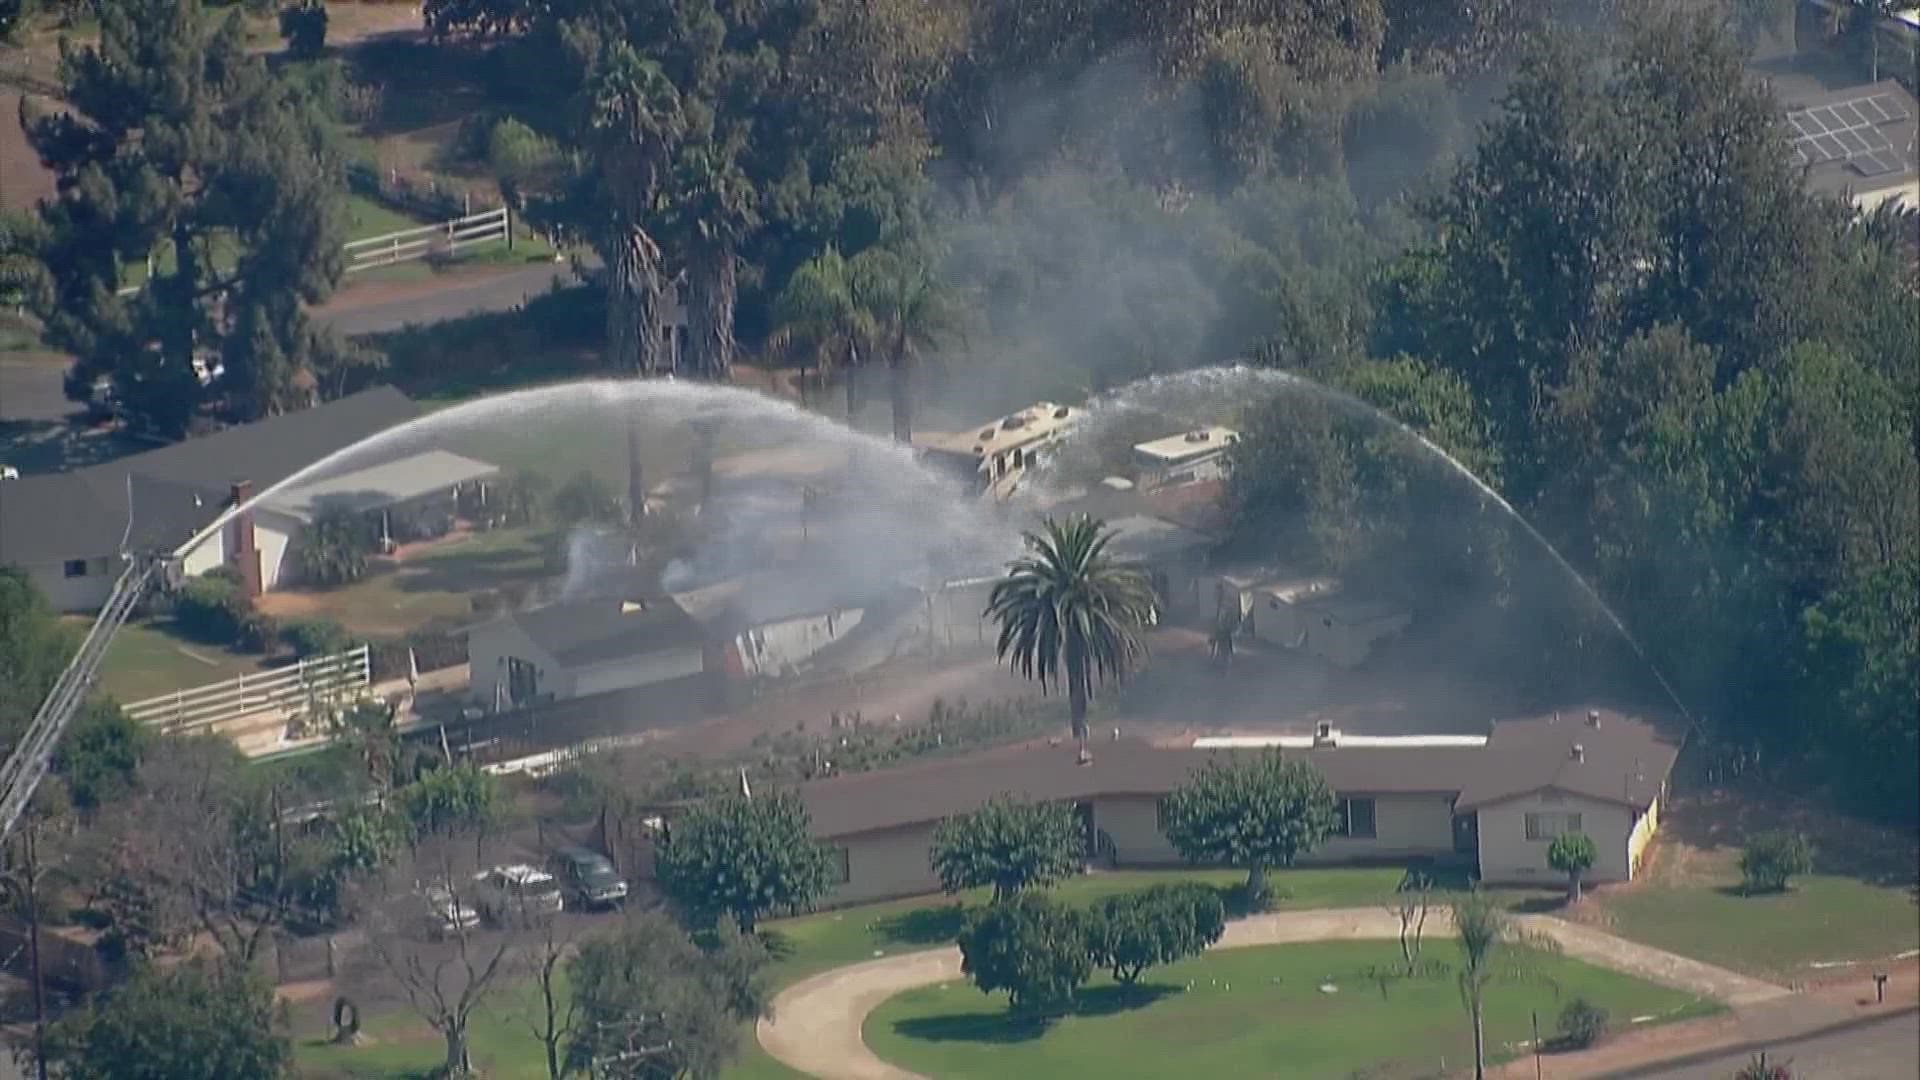 The fire started around 9 a.m. in the 700 block of 4th Street in El Cajon, according to fire officials.